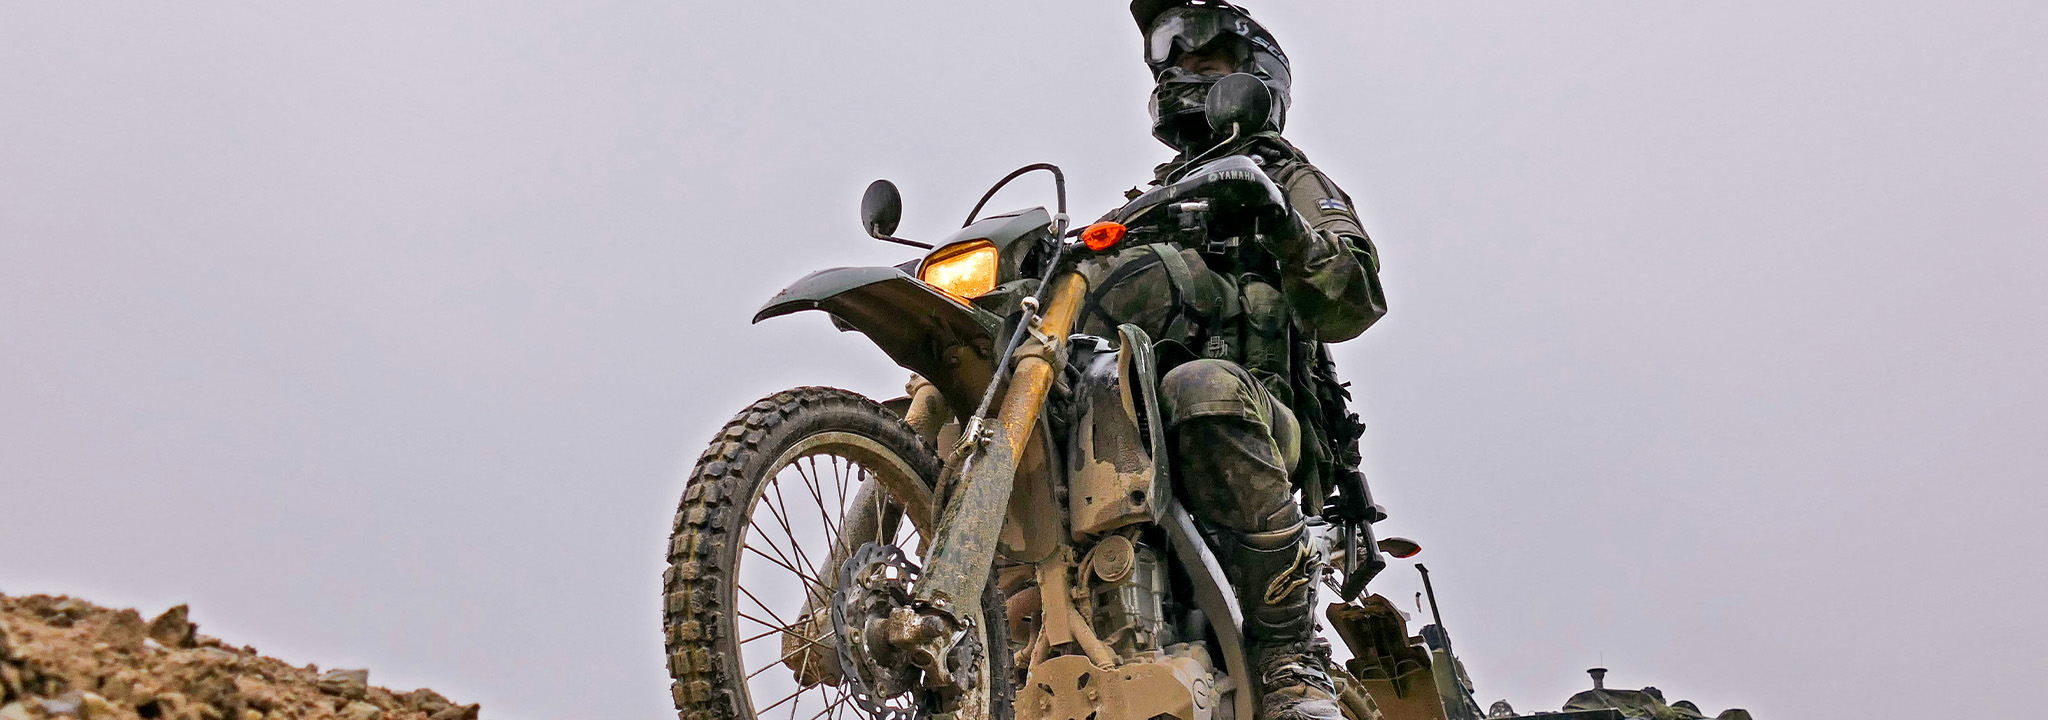 Conscript driving a motorcycle.